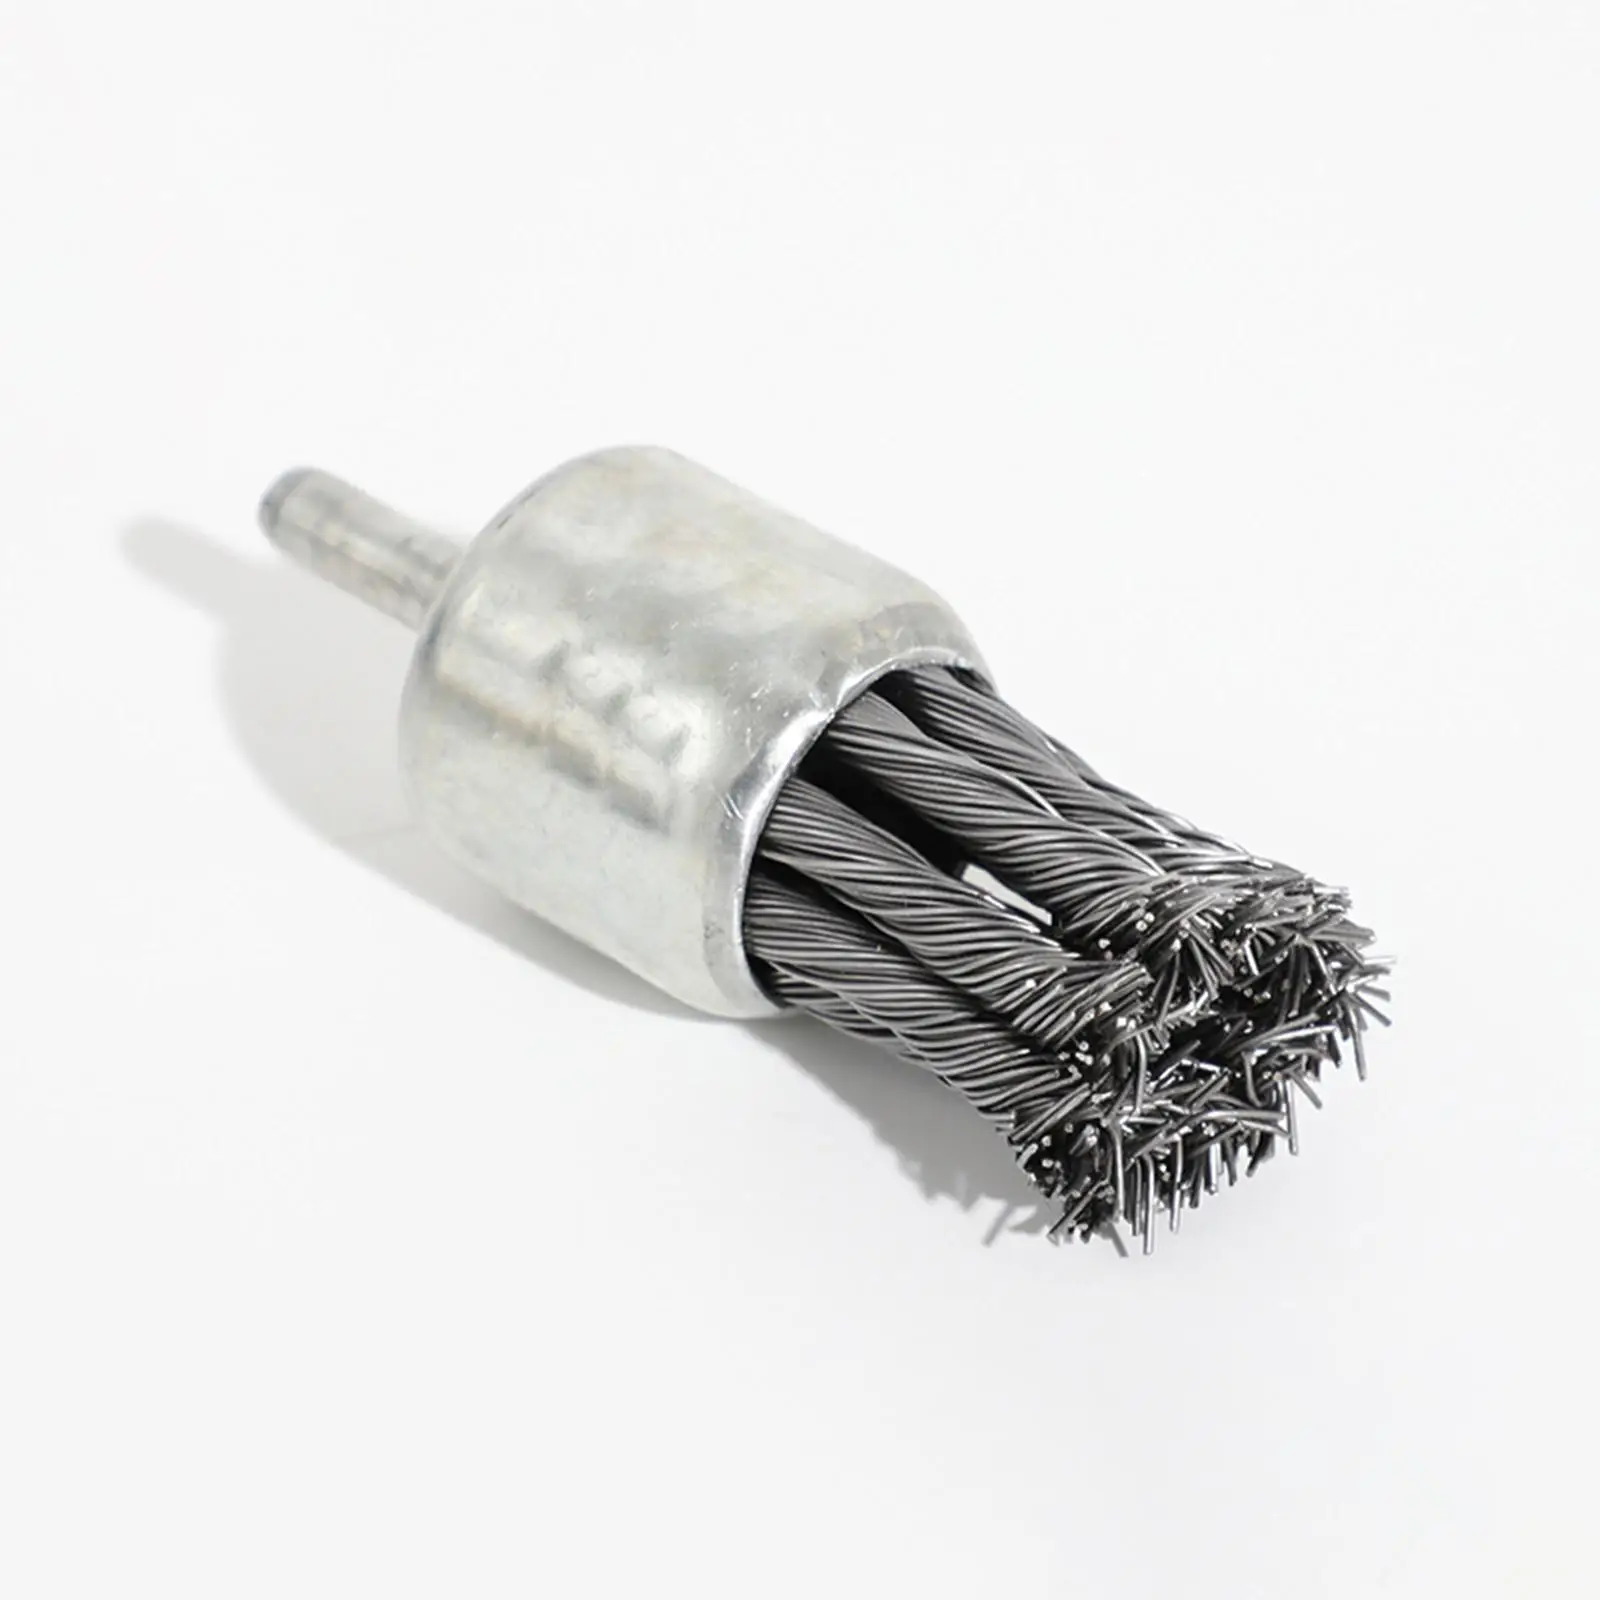 Knot Wire End Brush Gadget Rotary Steel Drill Attachment Rust Removal Replacement Metal Derusting Brush for Drill